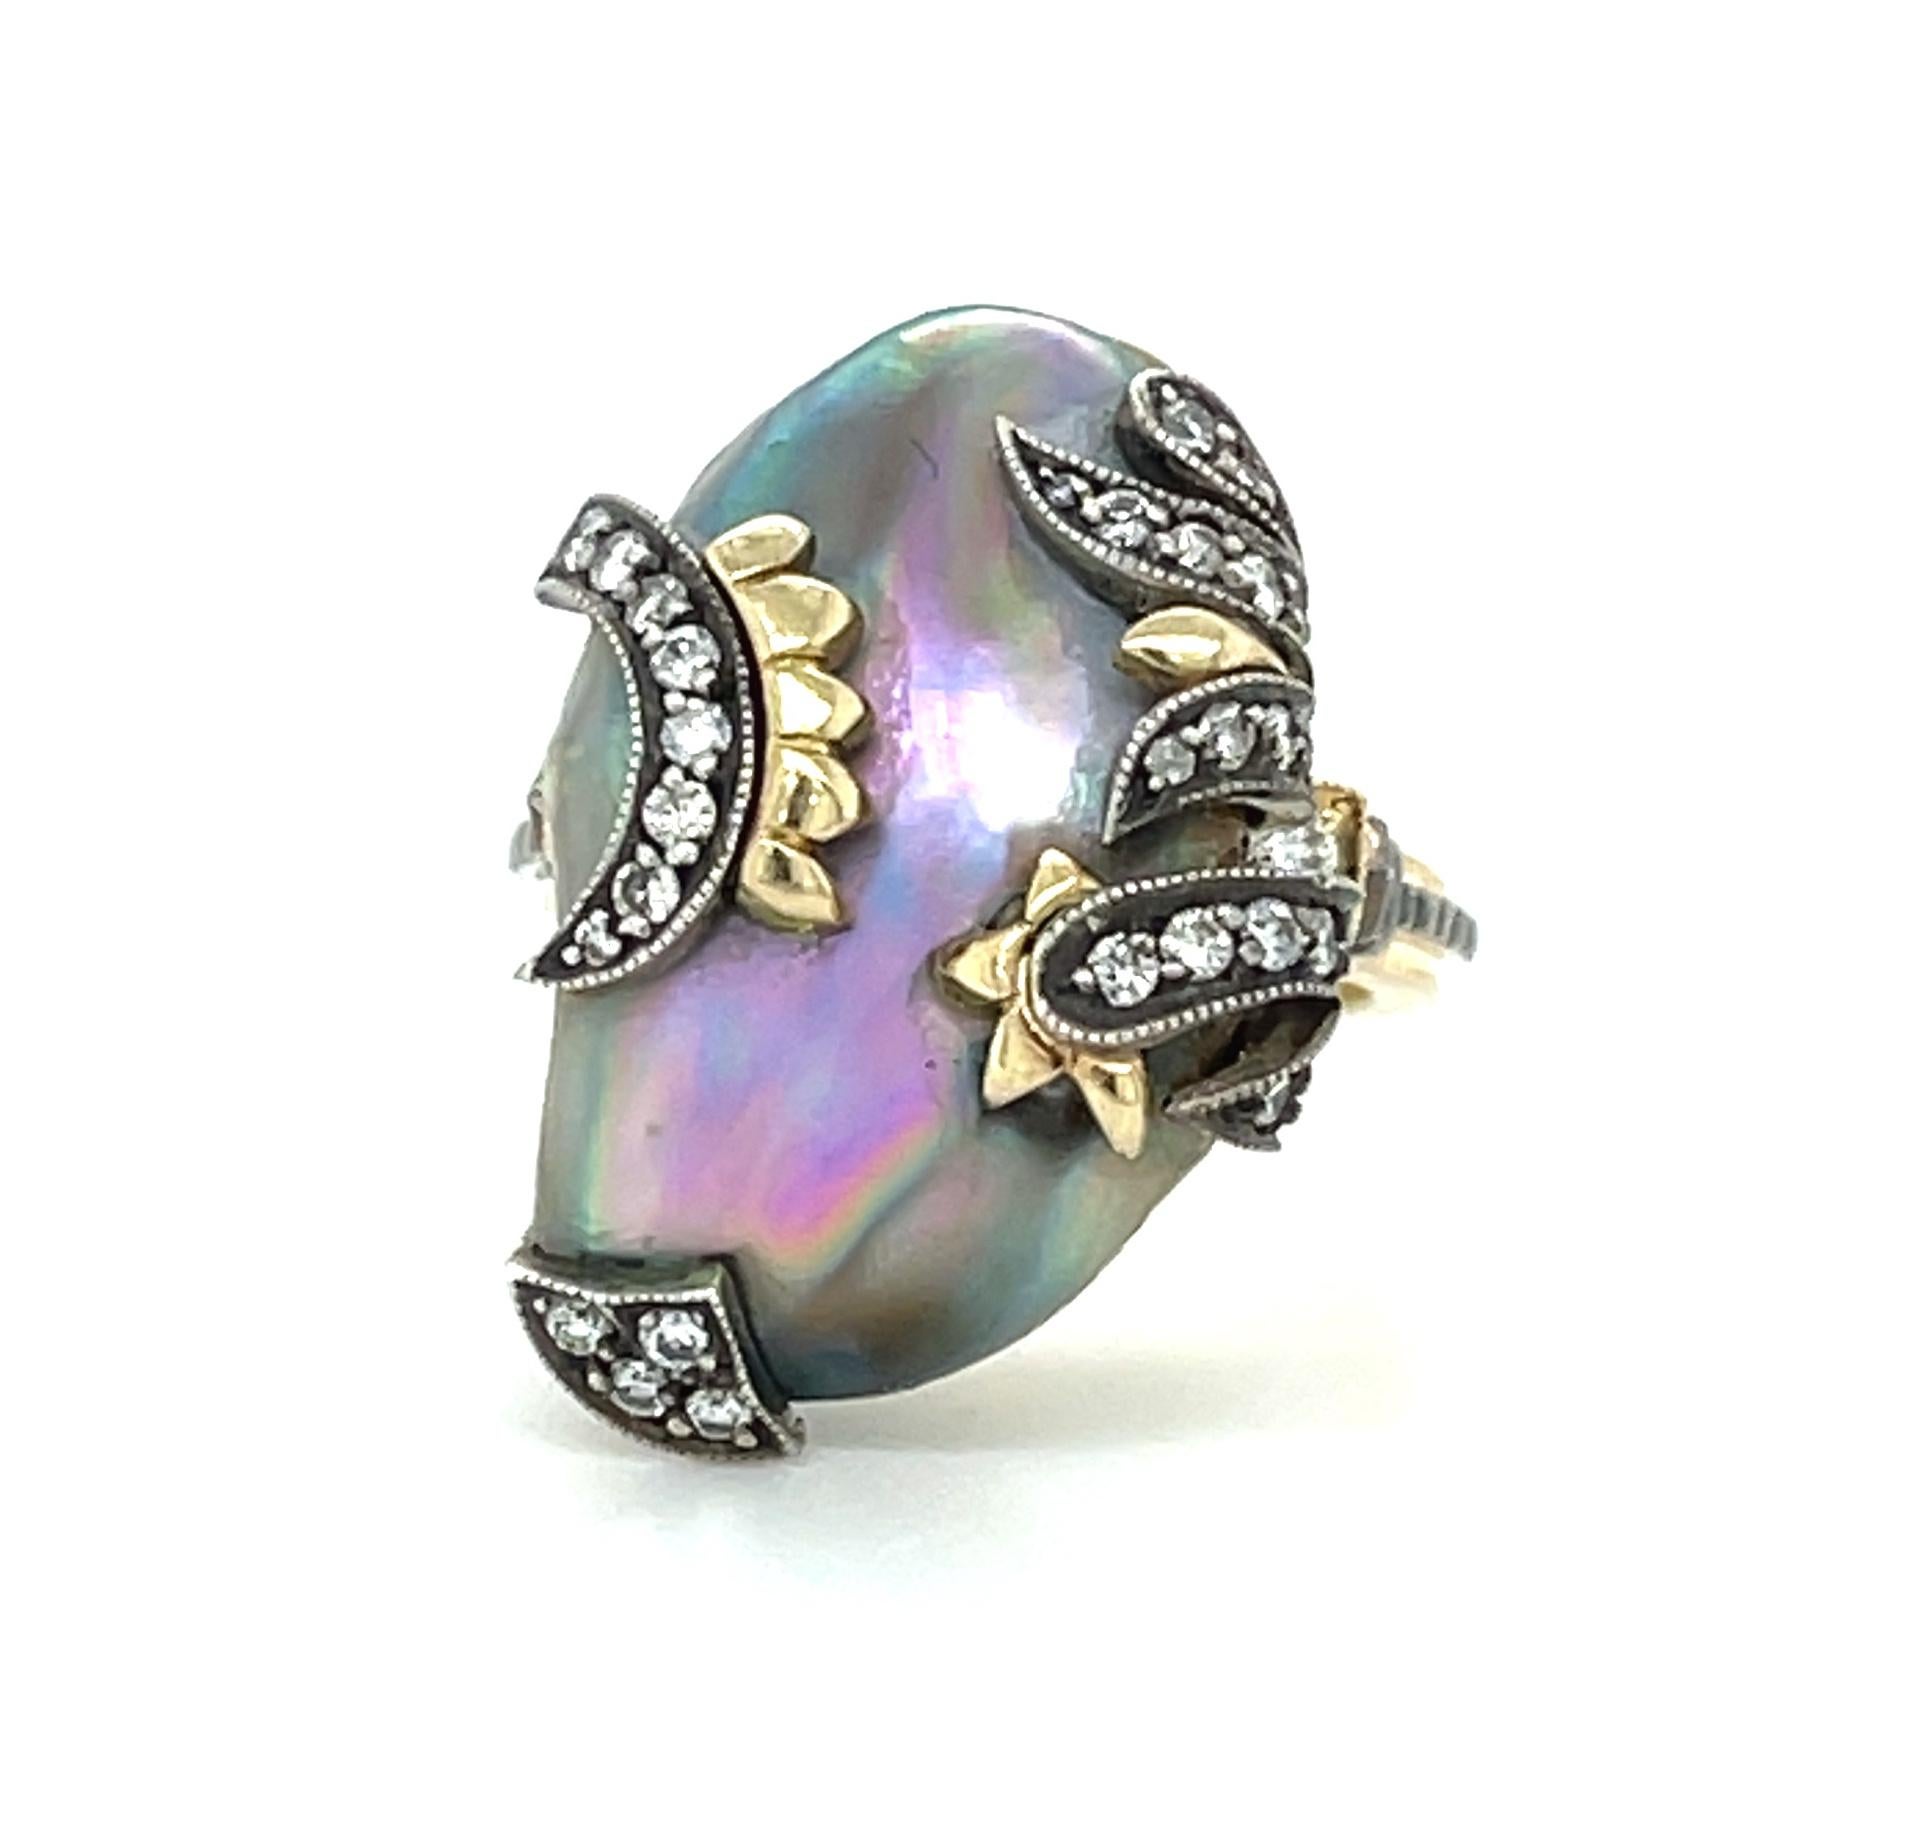 This eye-catching ring features a large, 16.60 carat natural abalone pearl set in 18k yellow and white gold. Abalone pearls are not cultured like most commercially available pearls seen in fine jewelry. They form naturally and are highly prized